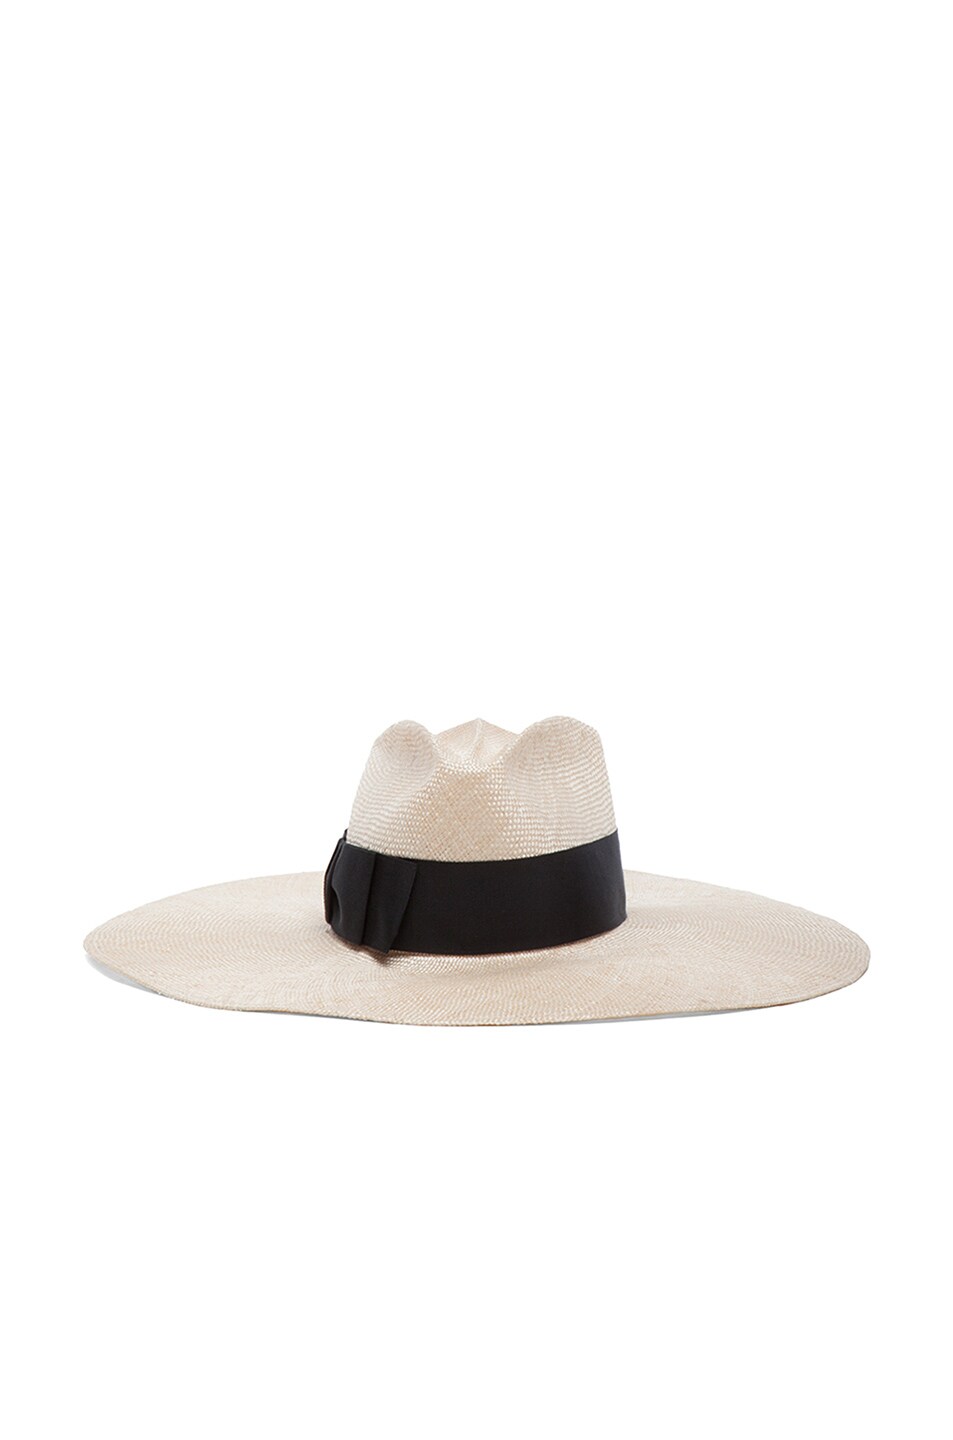 Image 1 of Gladys Tamez Millinery The Wren Hat in Natural & Black